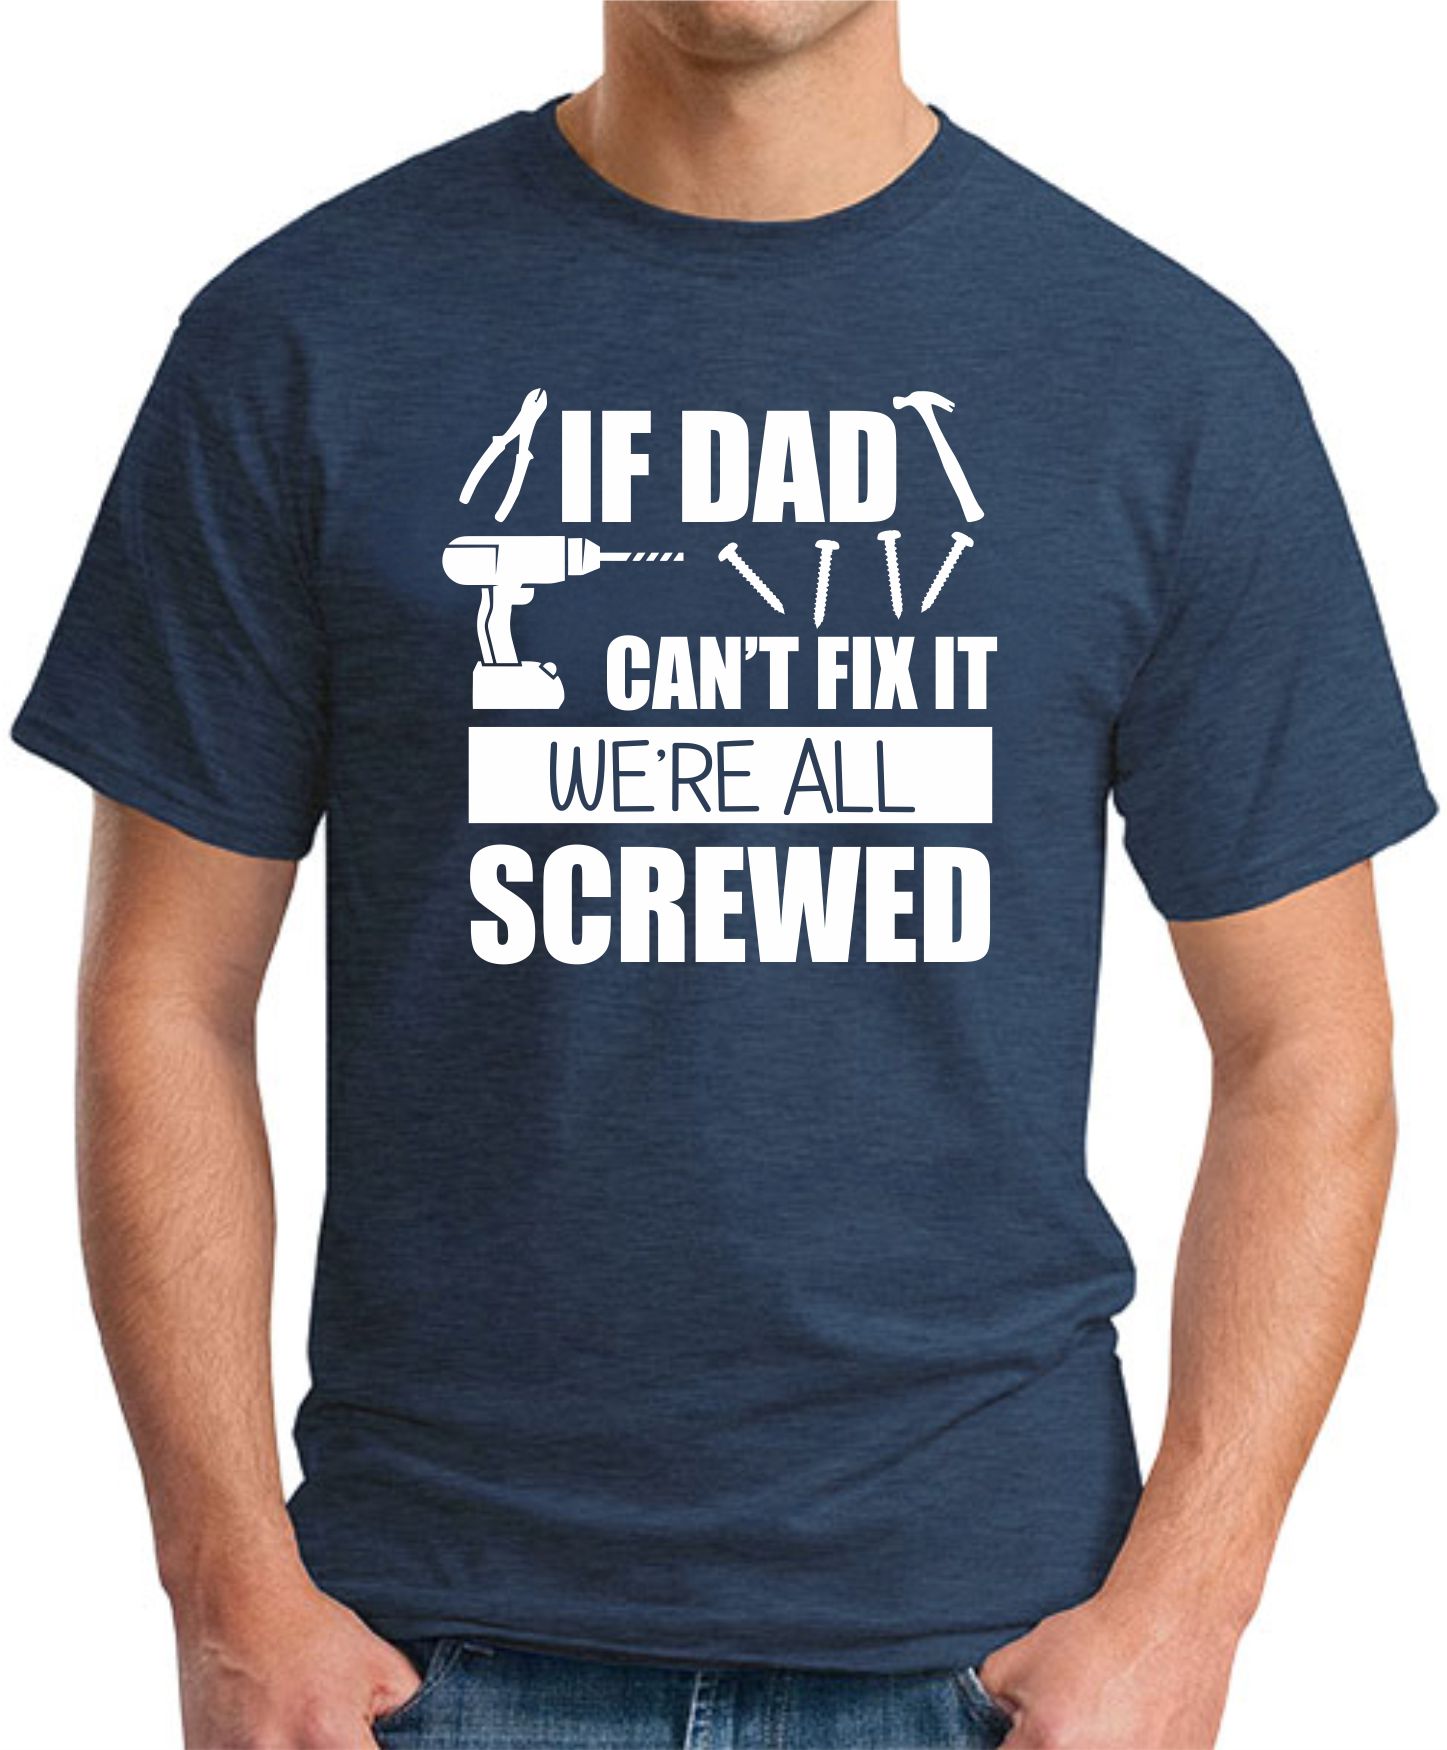 IF DAD CAN'T FIX IT WE'RE ALL SCREWED NAVY